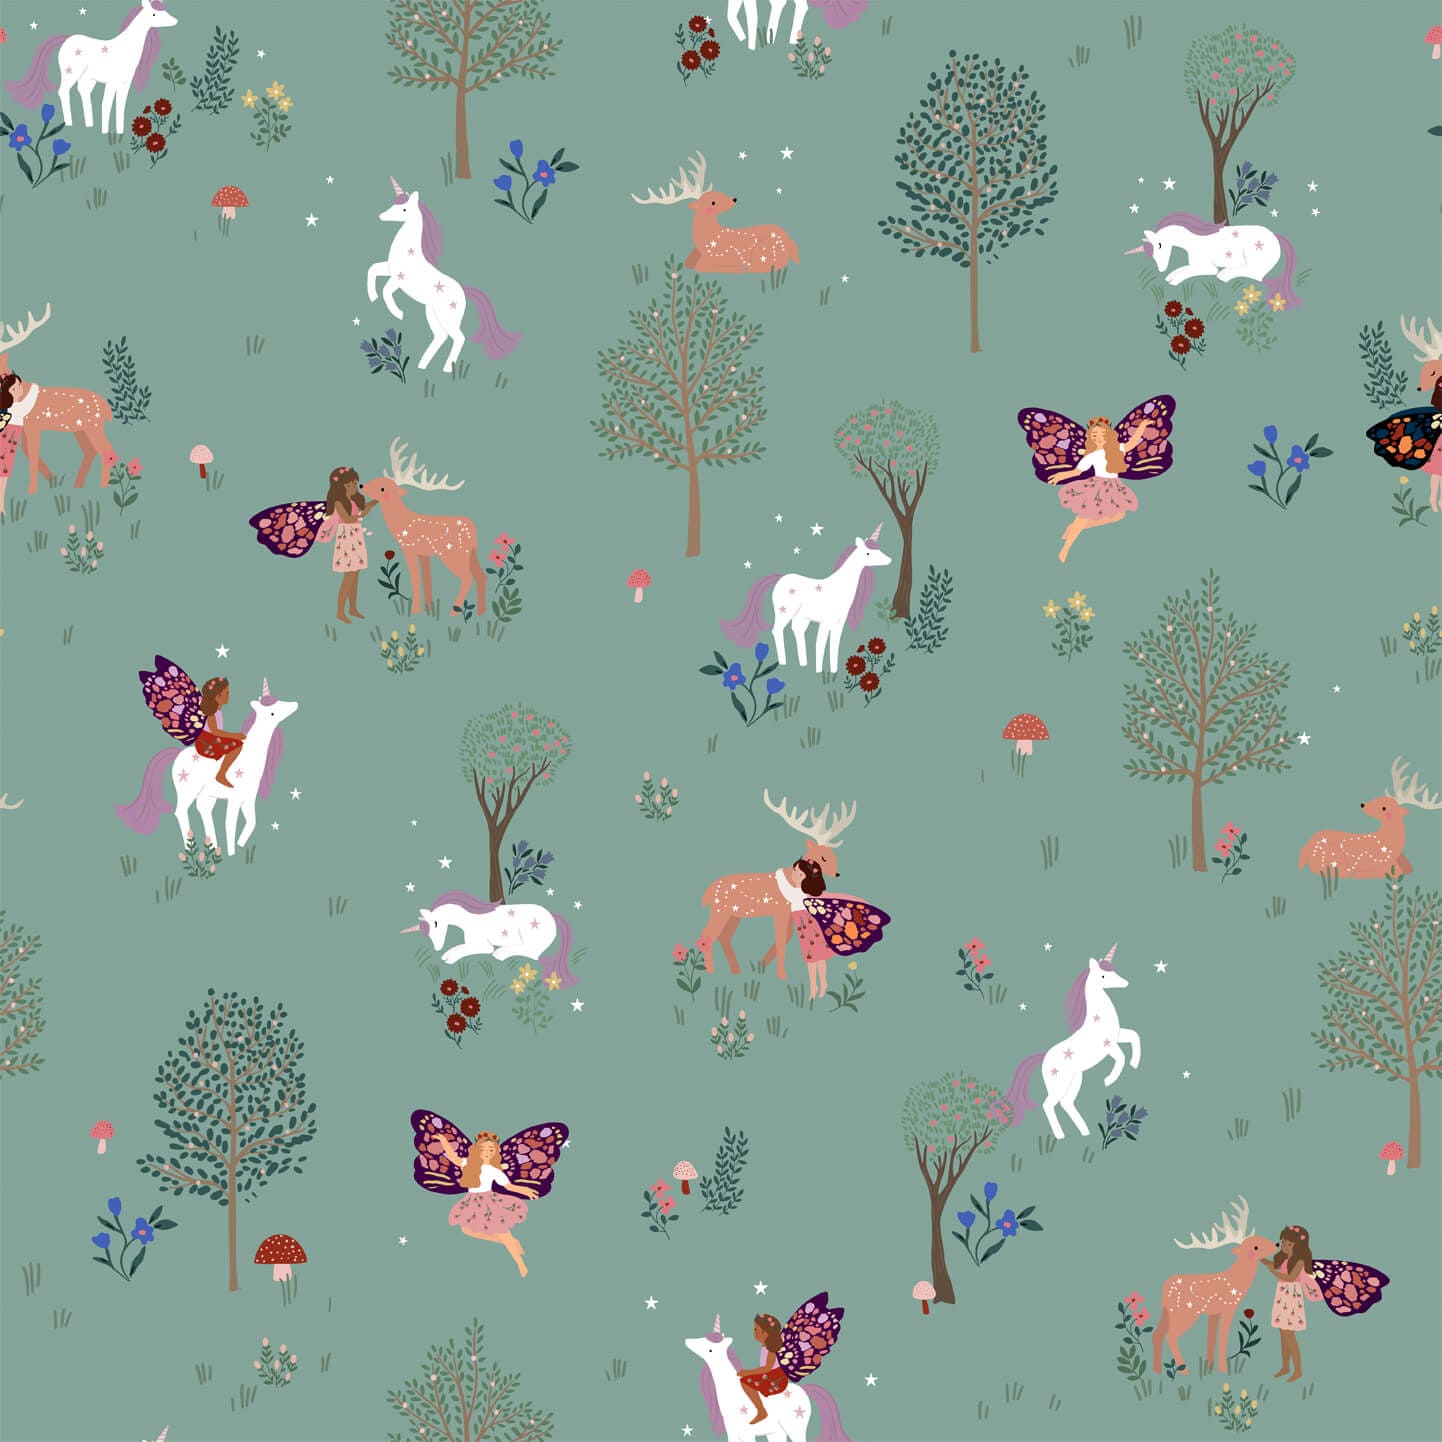 Wallpaper of a Green magical forest with white and purple unicorns, red and white toadstools, brown deers and delicate fairies. Flowers and trees.